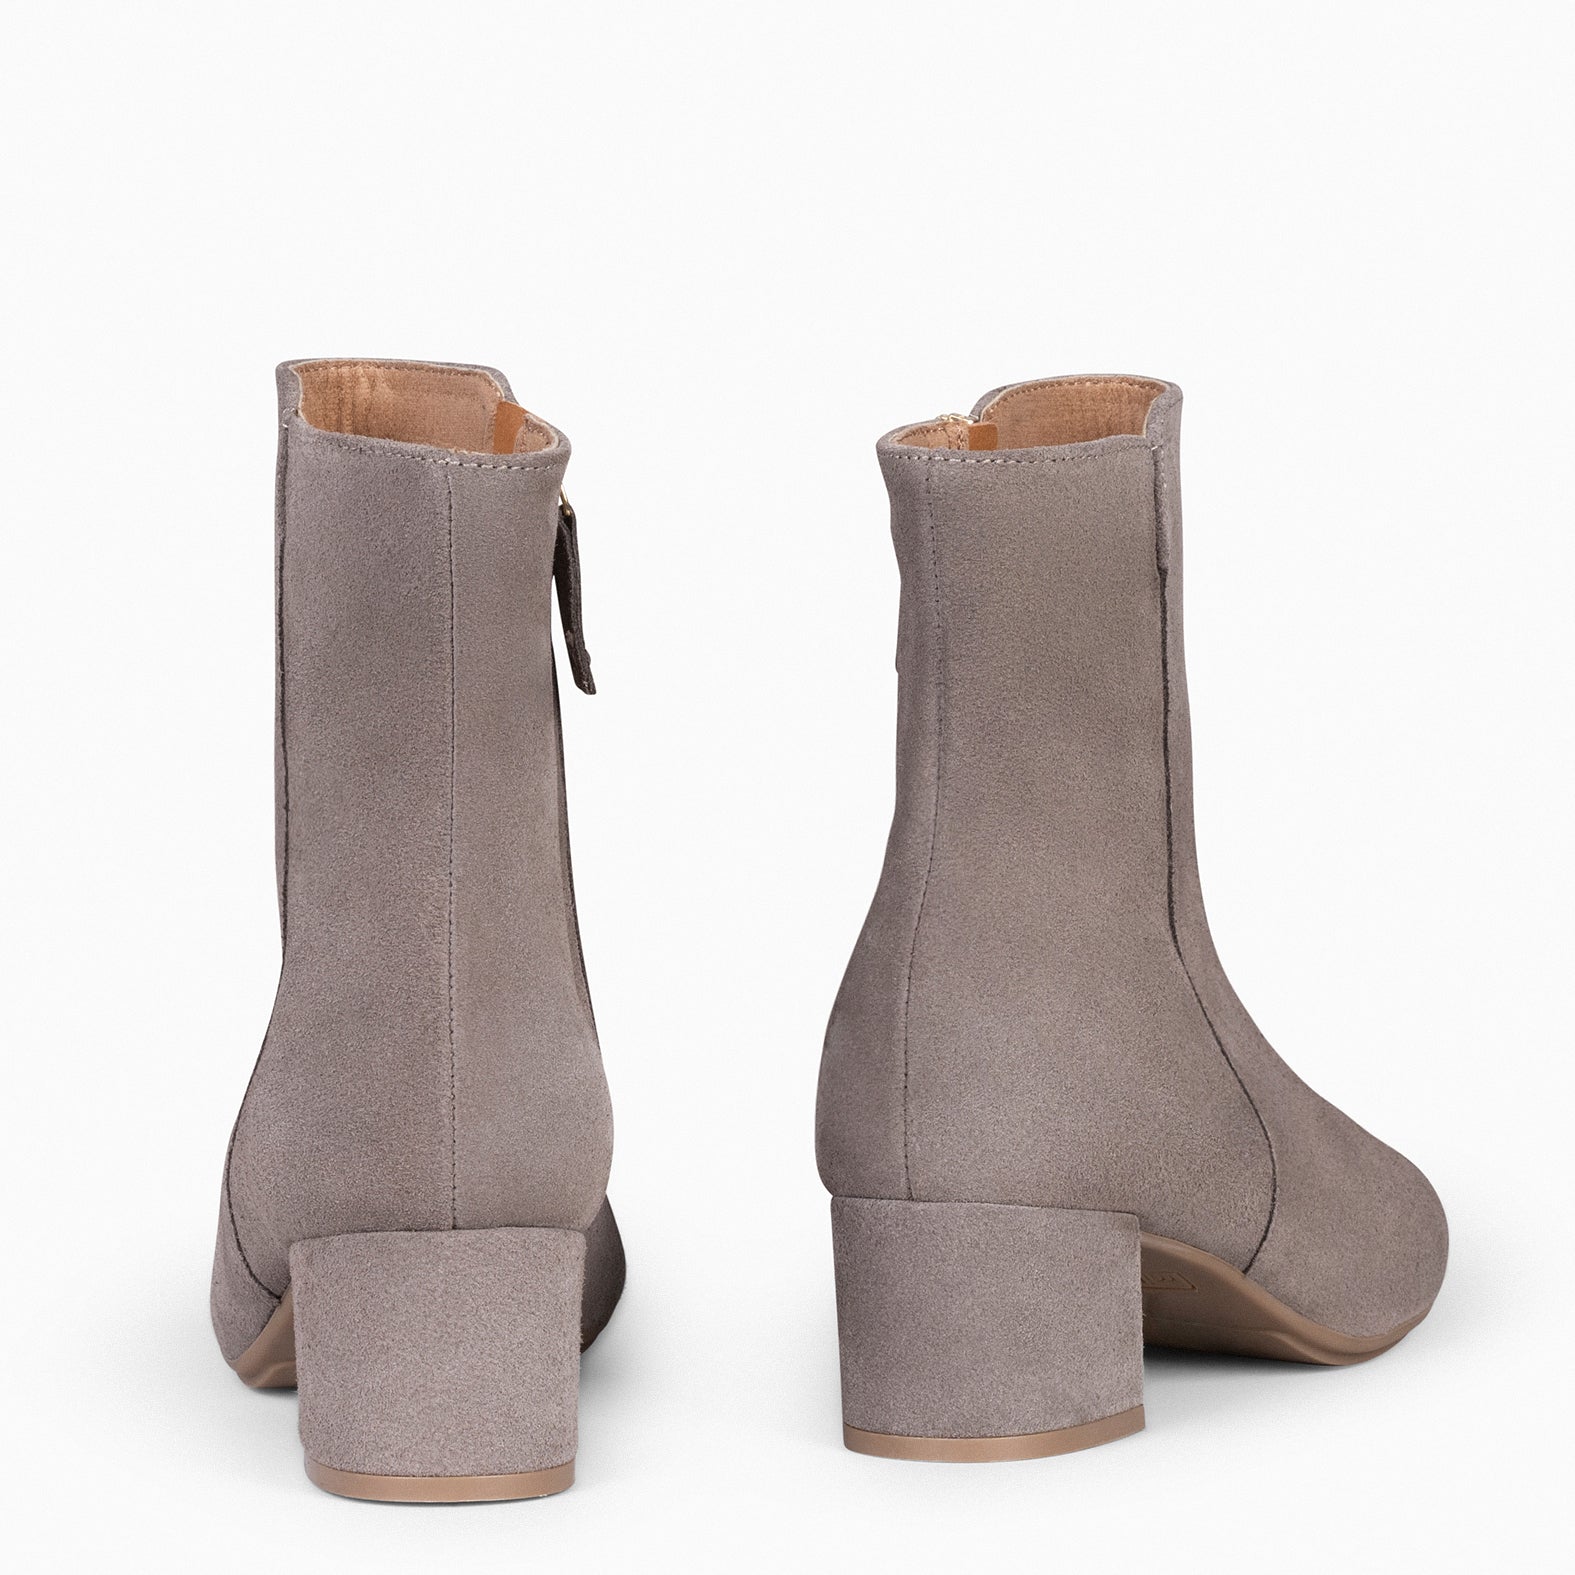 MAIA – TAUPE Women Suede Booties